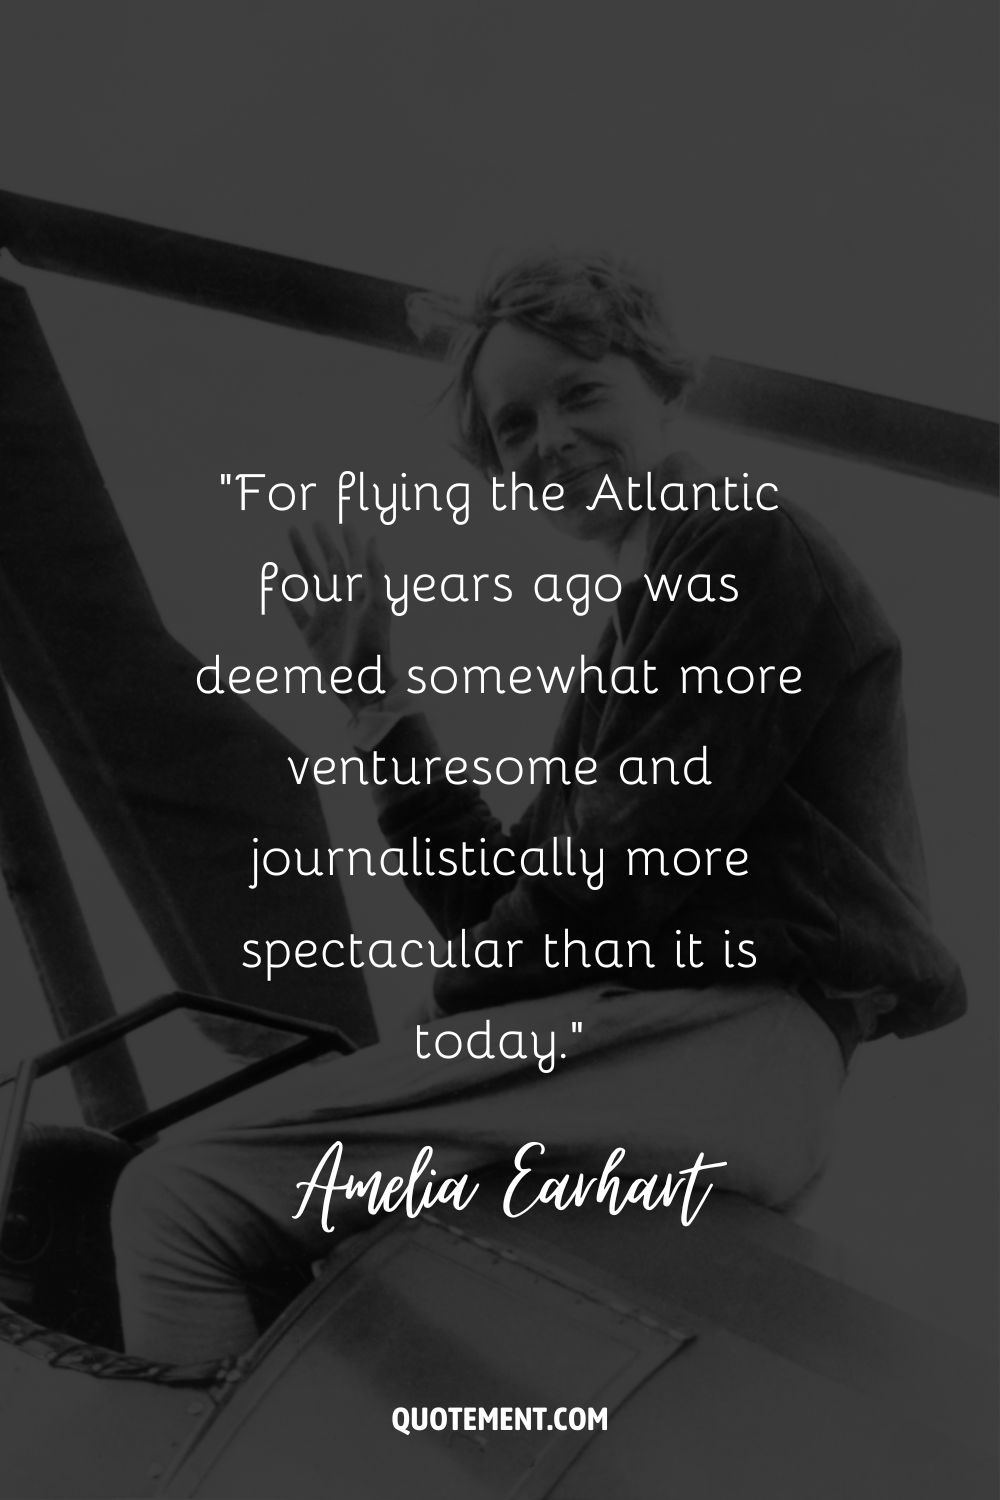 “For flying the Atlantic four years ago was deemed somewhat more venturesome and journalistically more spectacular than it is today.” ― Amelia Earhart